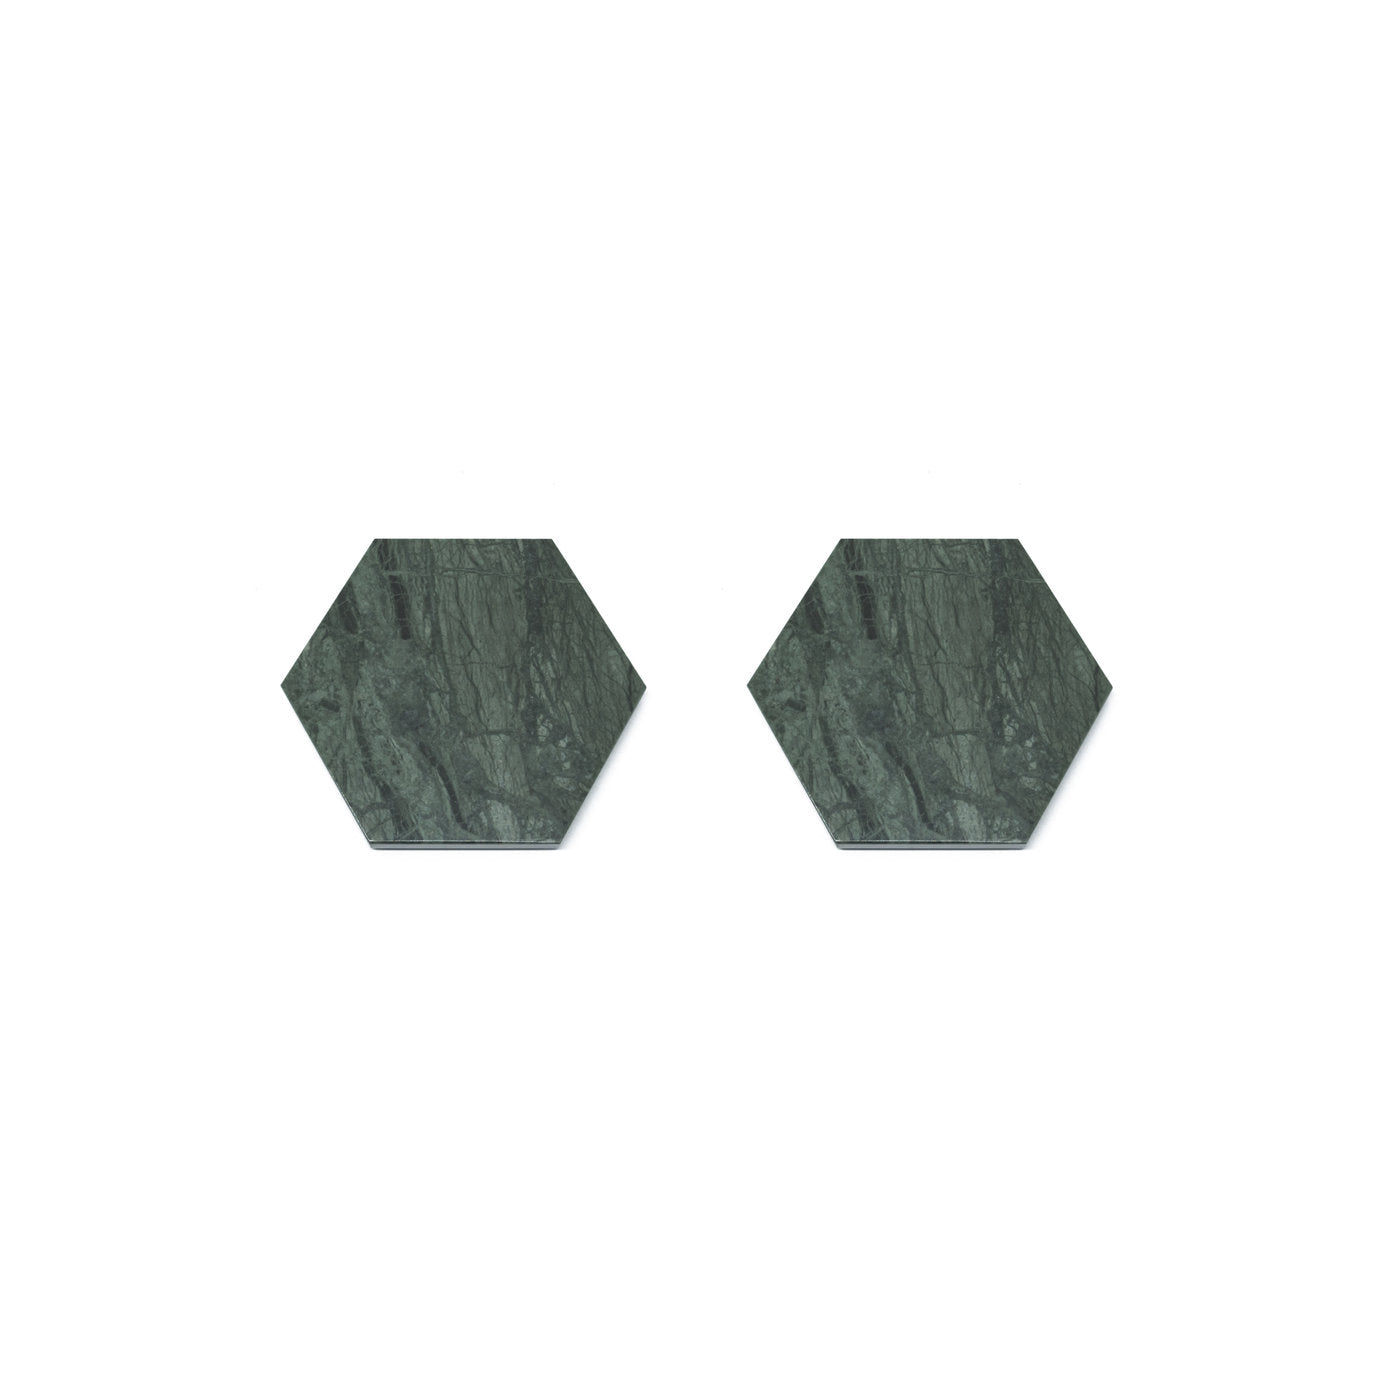 Set of 4 Hexagonal Coasters in Green Marble - Alternative view 1